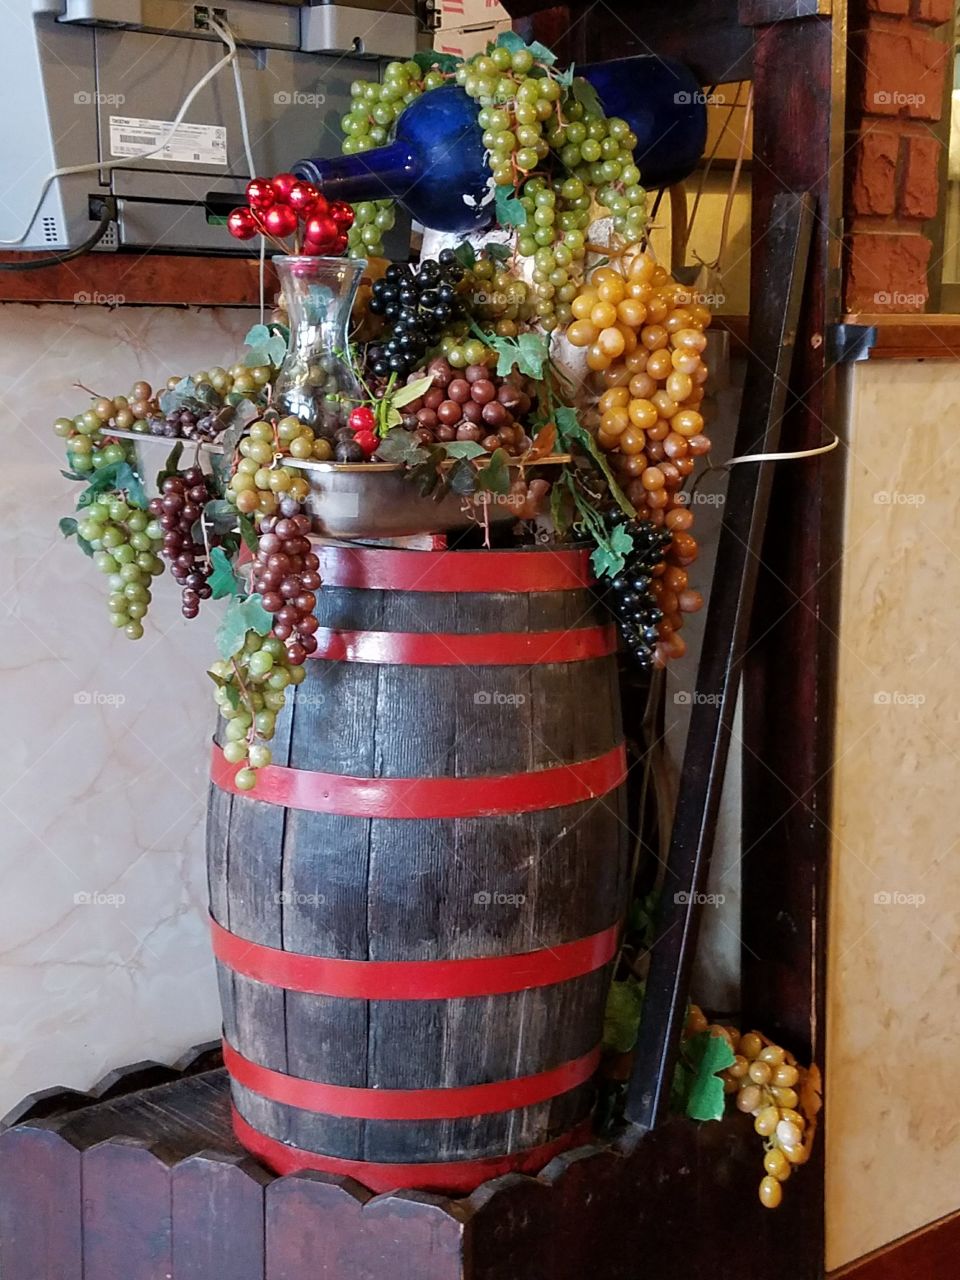 the barrel and fruits